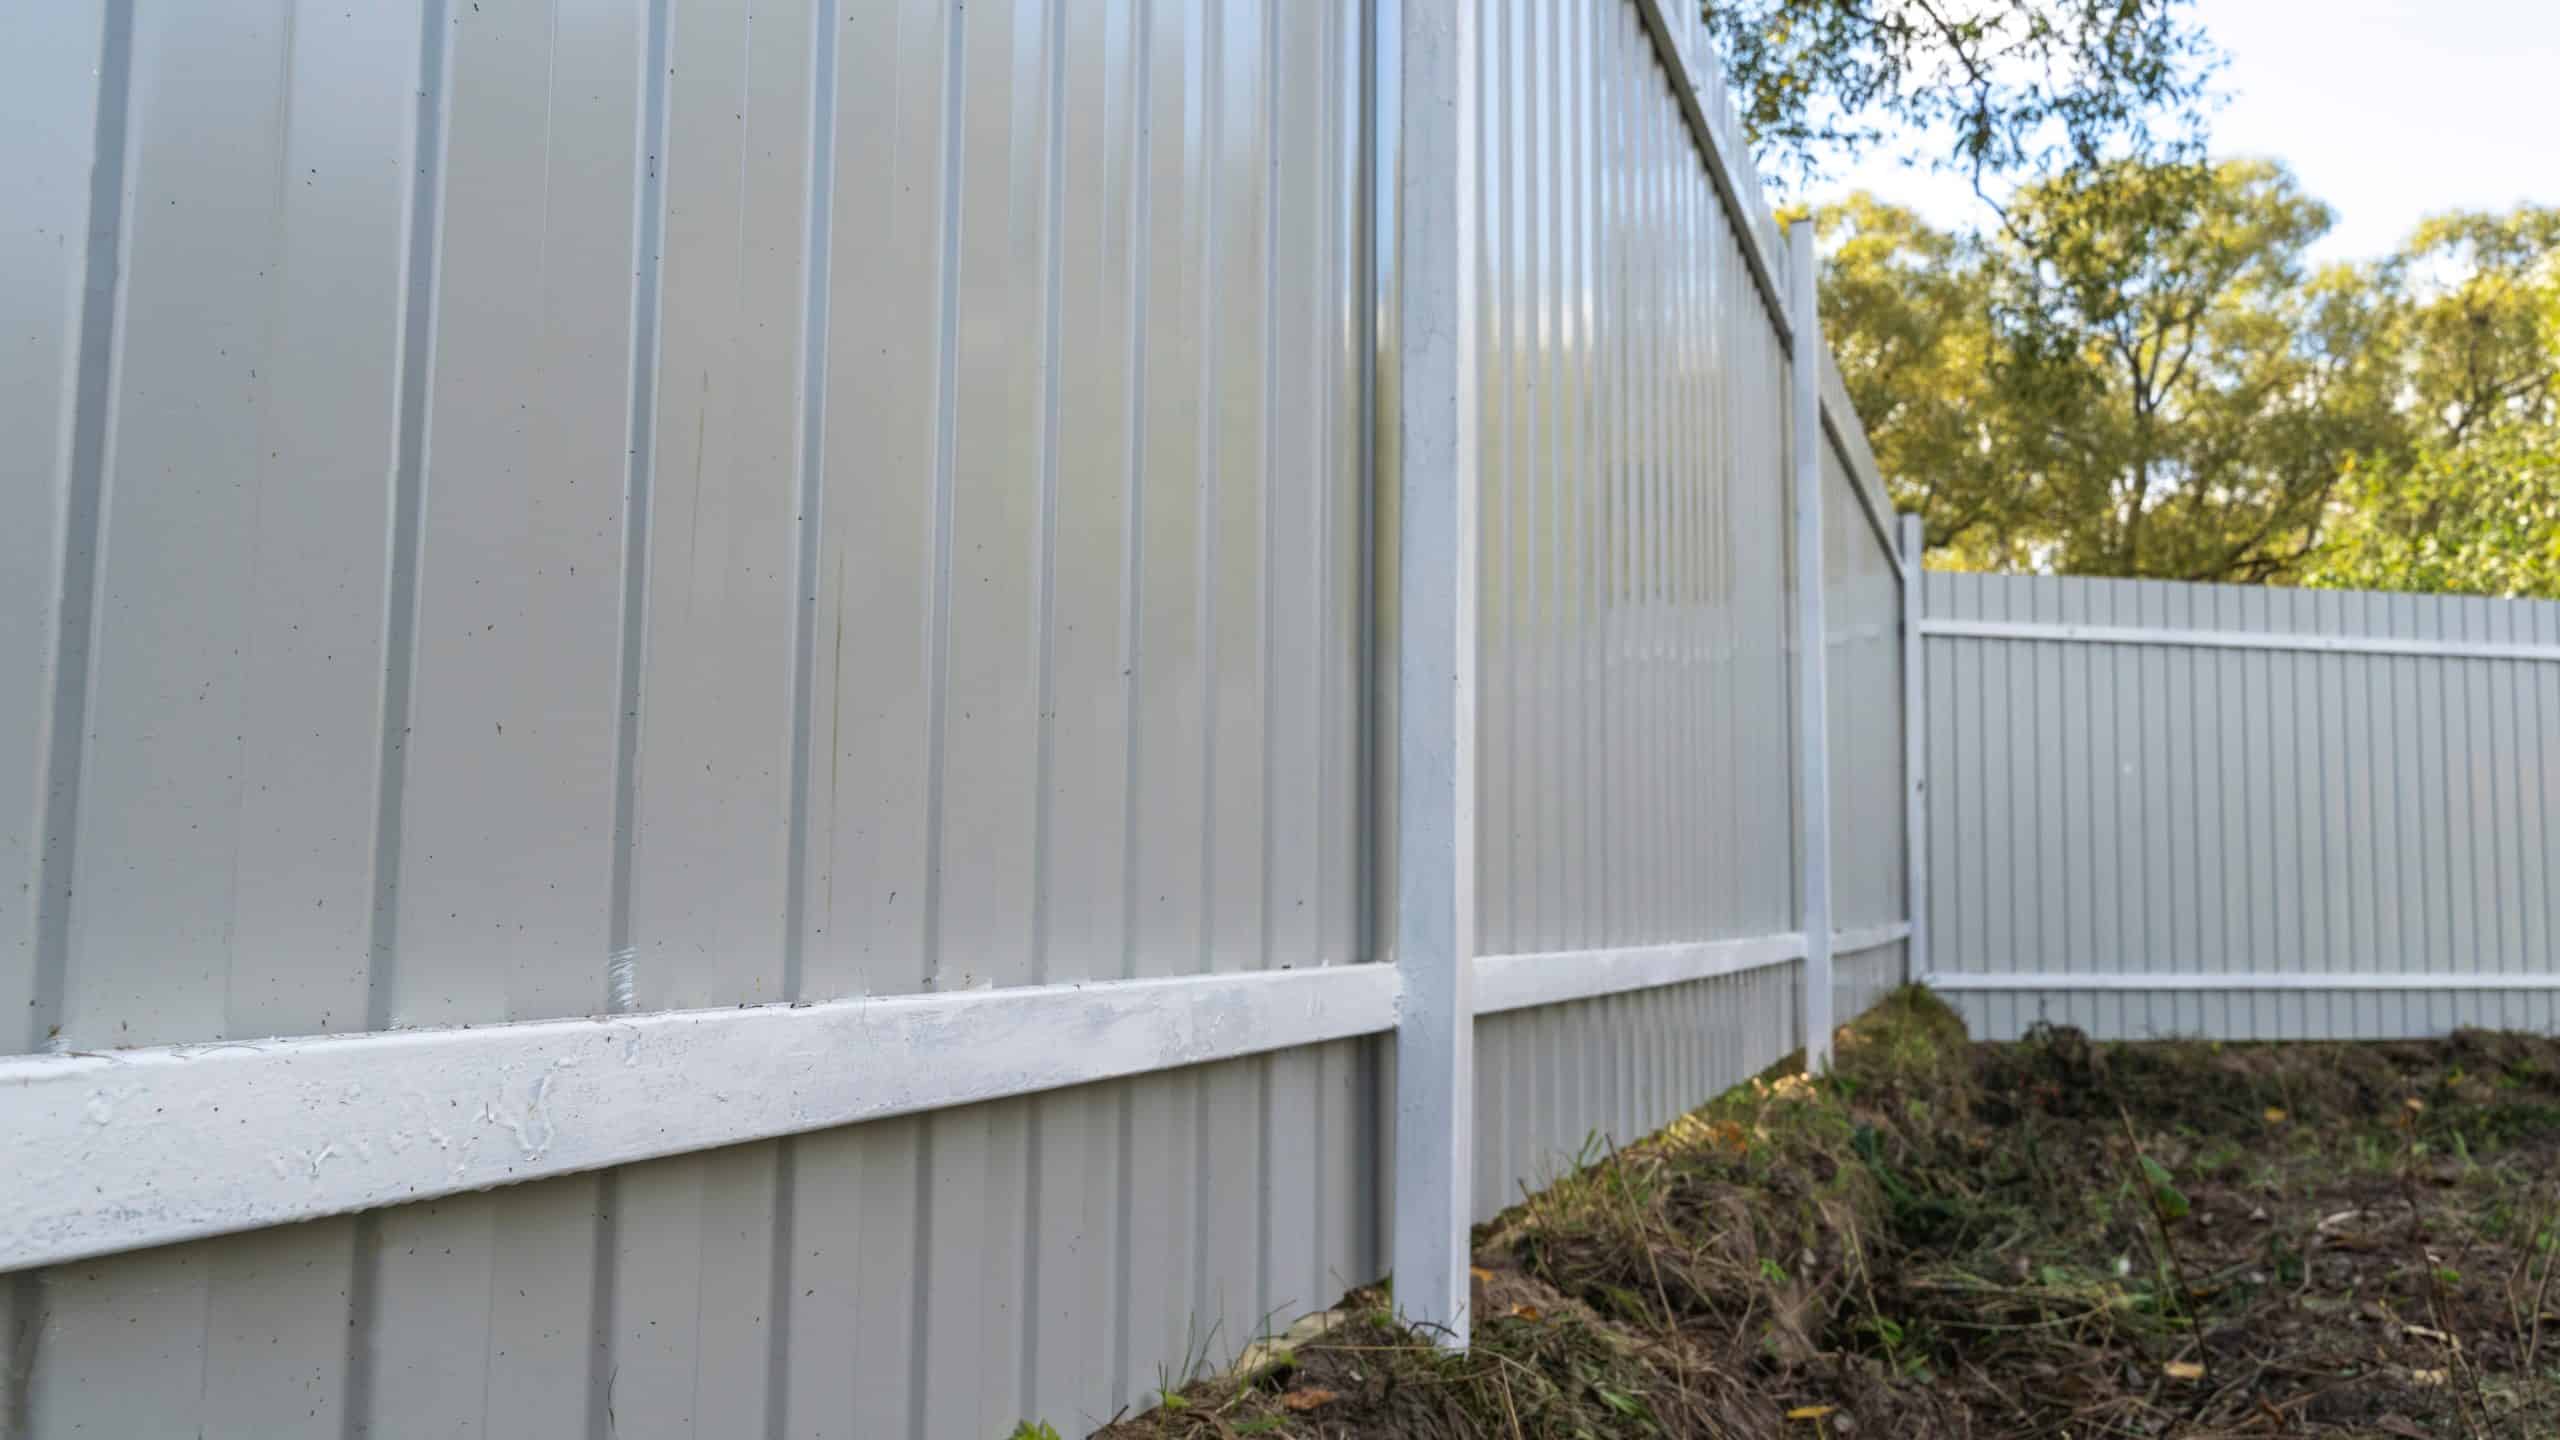 Your step-by-step guide to putting up a Fence